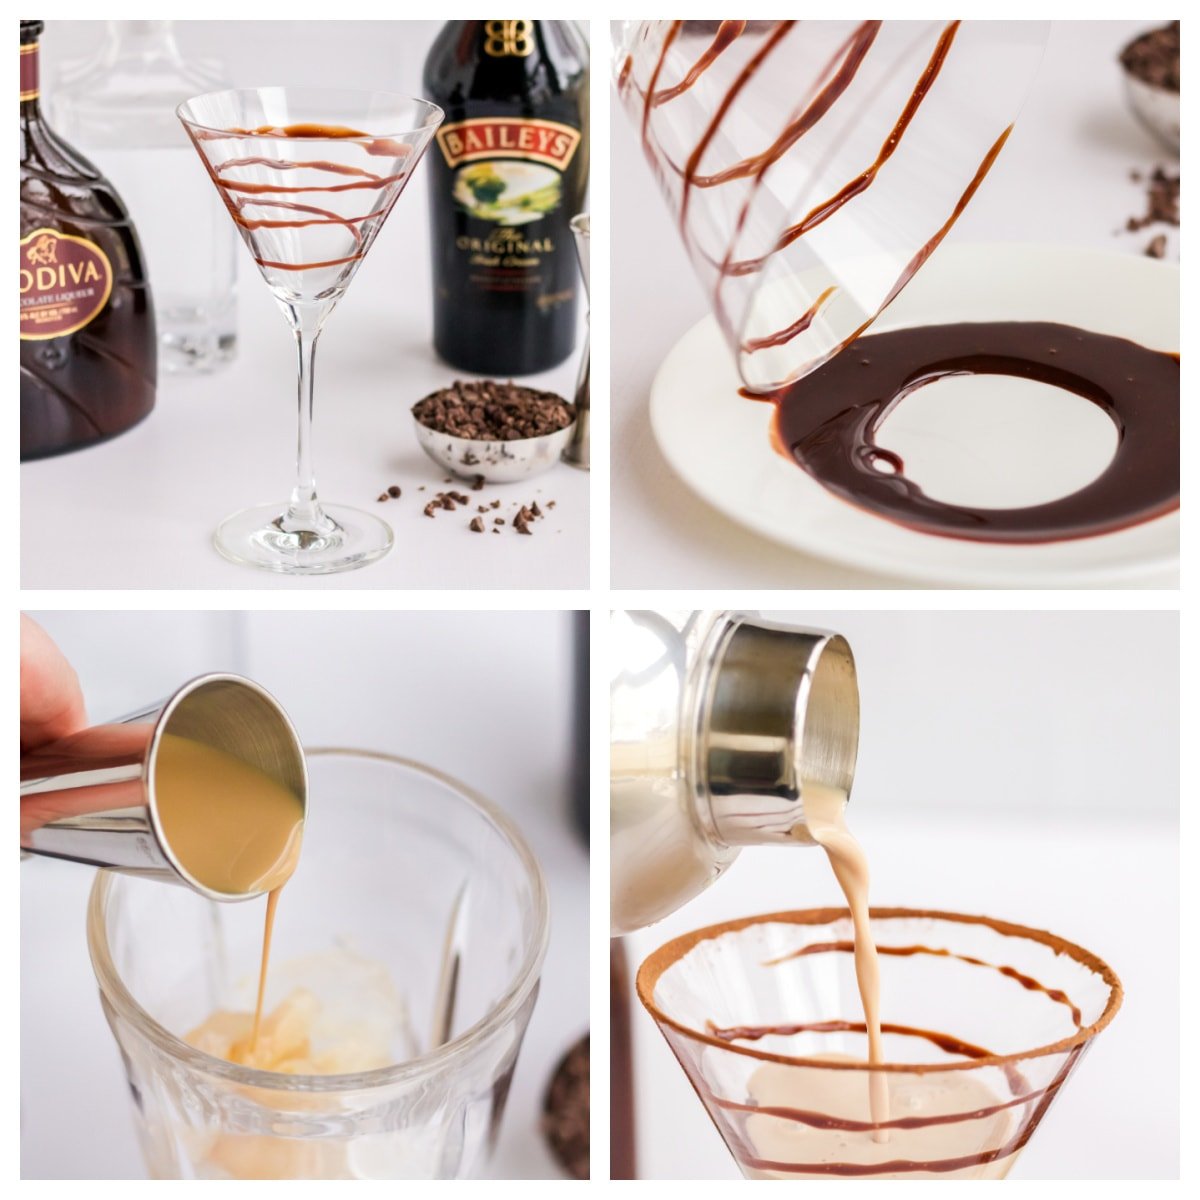 step-by-step images of how to make a chocolate martini 